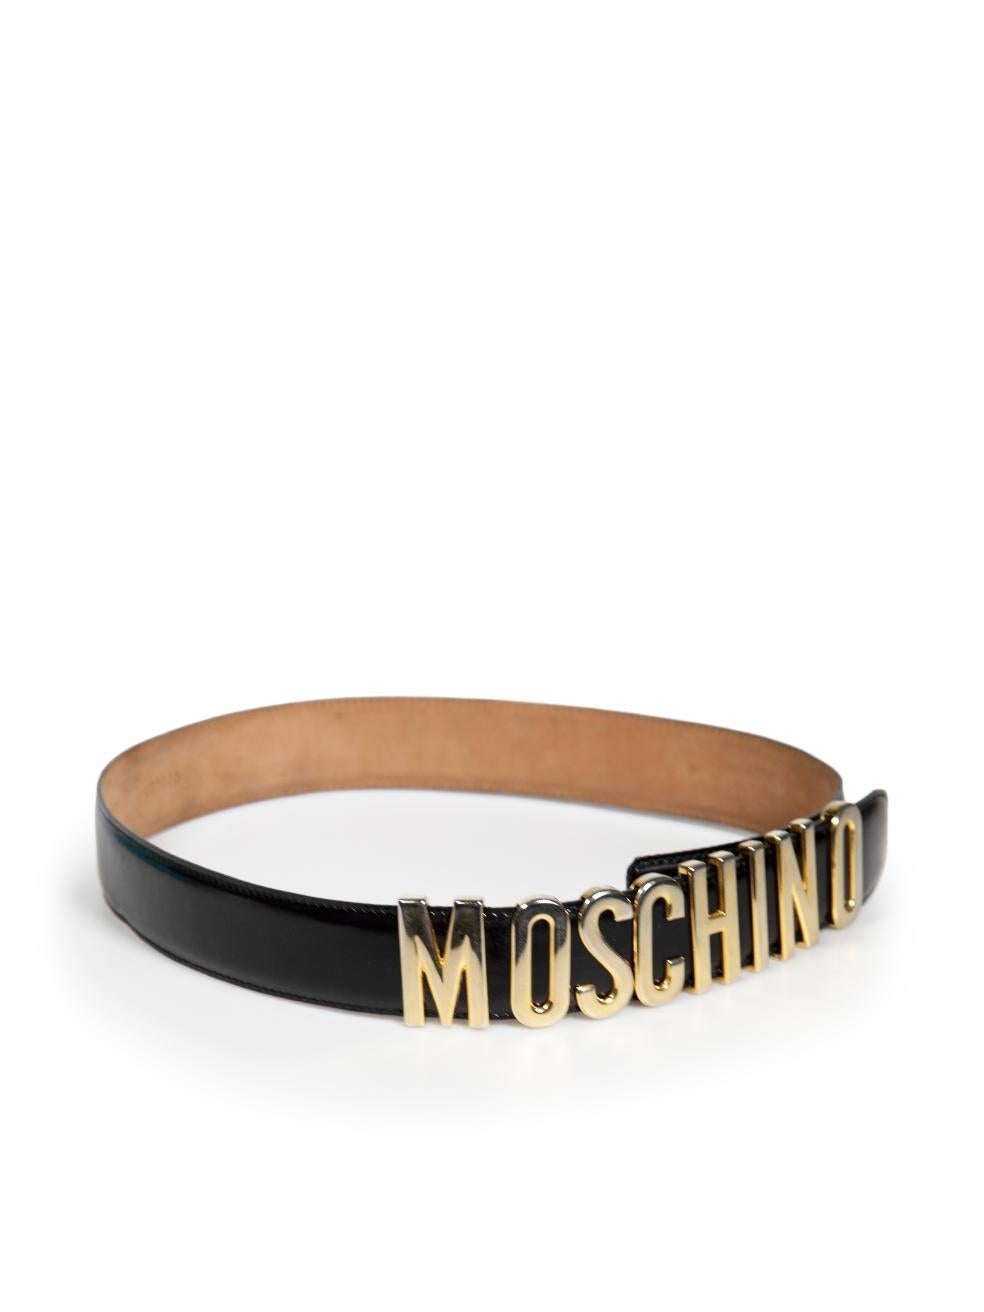 CONDITION is Good. Minor wear to belt is evident. General scratches to leather under metal logo hardware, with tarnishing to the metal logo hardware on this used Moschino designer resale item.
 
 
 
 Details
 
 
 Black
 
 Leather
 
 Belt
 
 Gold